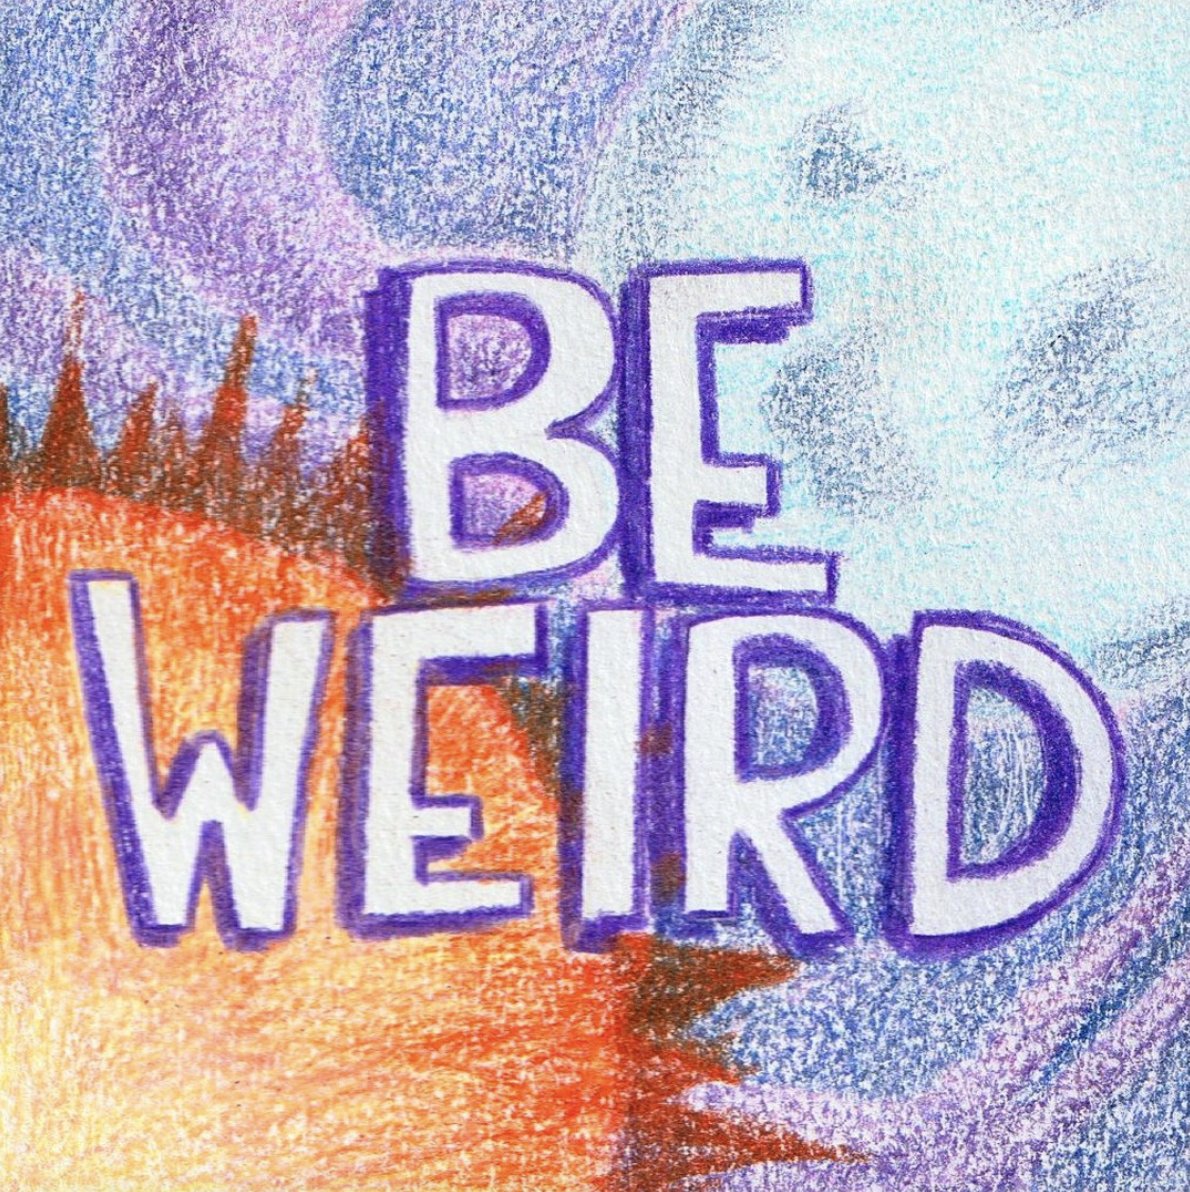 I've given lots of energy to worrying if I'm a 'weirdo.' But the weird parts are the very parts that I really, really like about myself. This year, I'm setting my sights on inner harmony. In 2023, my intention is to 'Be Weird.'

#HappyNewYear2023 #selflove #beweird #kidlitart